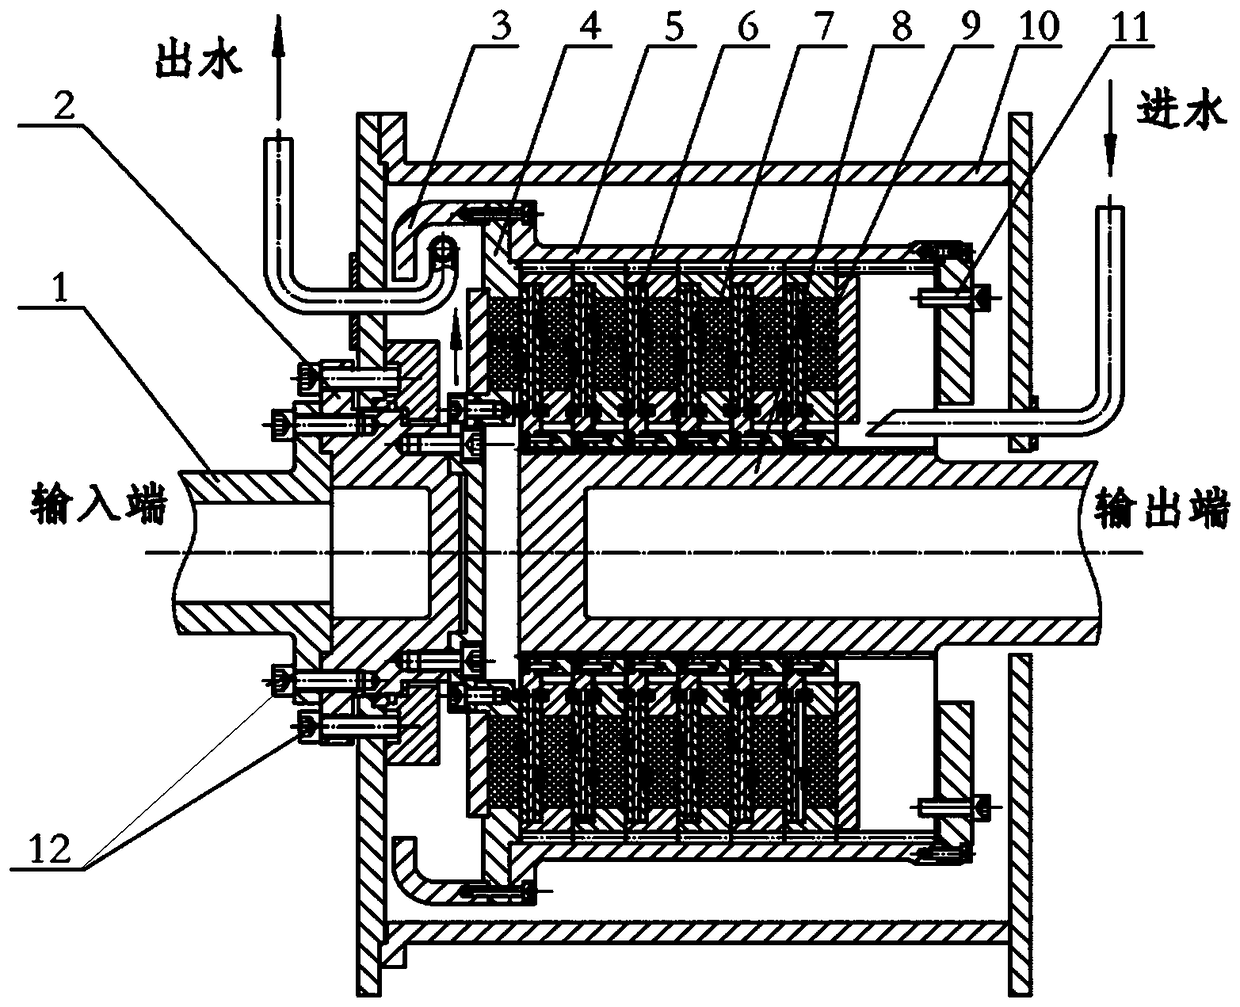 Multi-disk high-power moment-limiting permanent magnet eddy current coupling